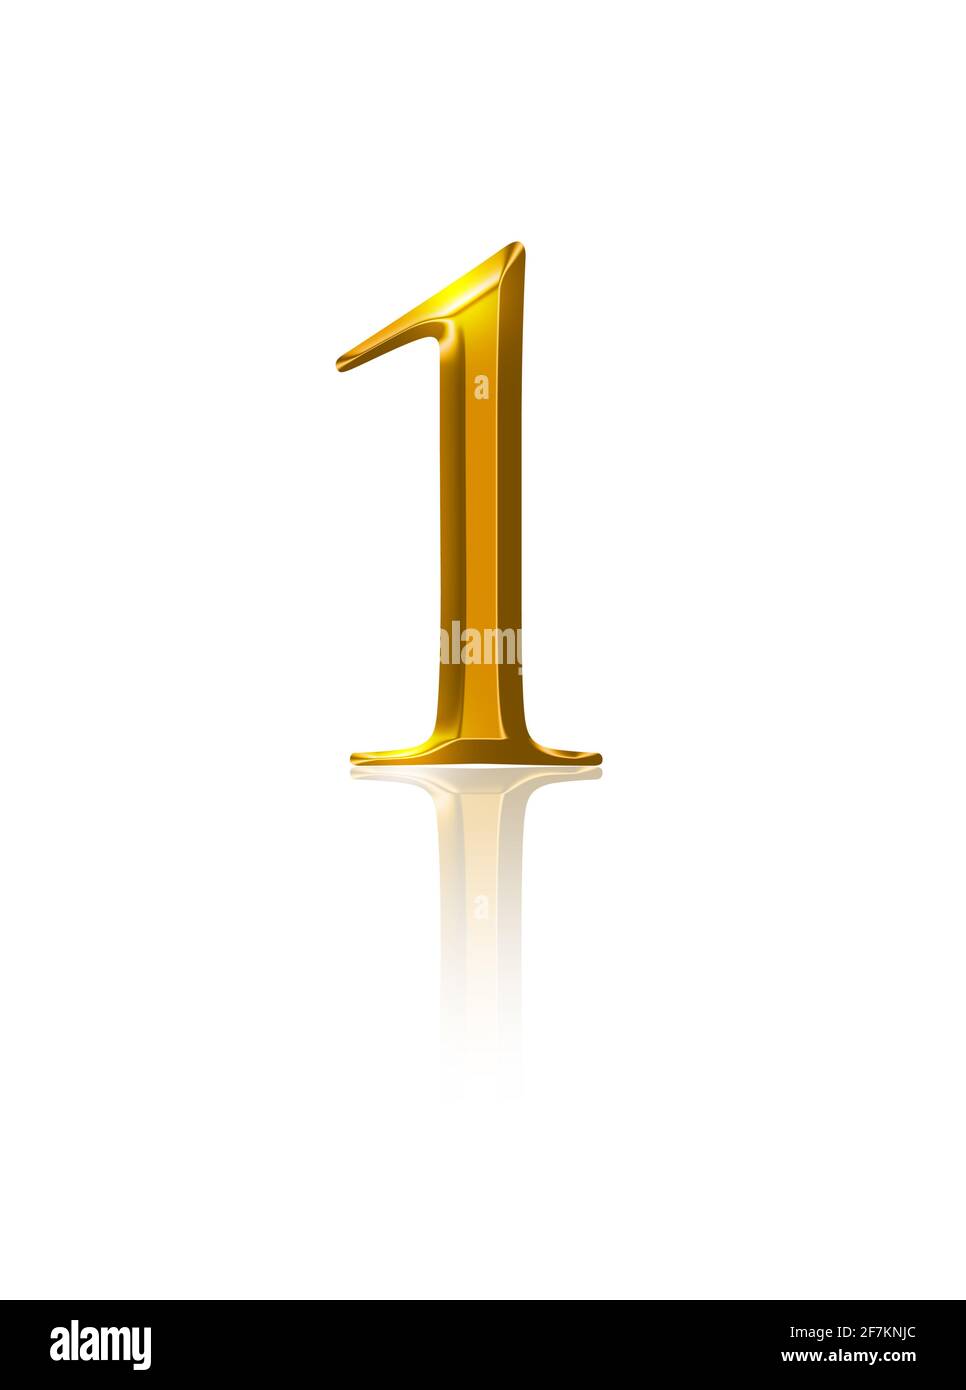 One, gold number, over white. Symbol of the number one, representing a single entity, first place or winner, the best, richest, greatest or other aims. Stock Photo